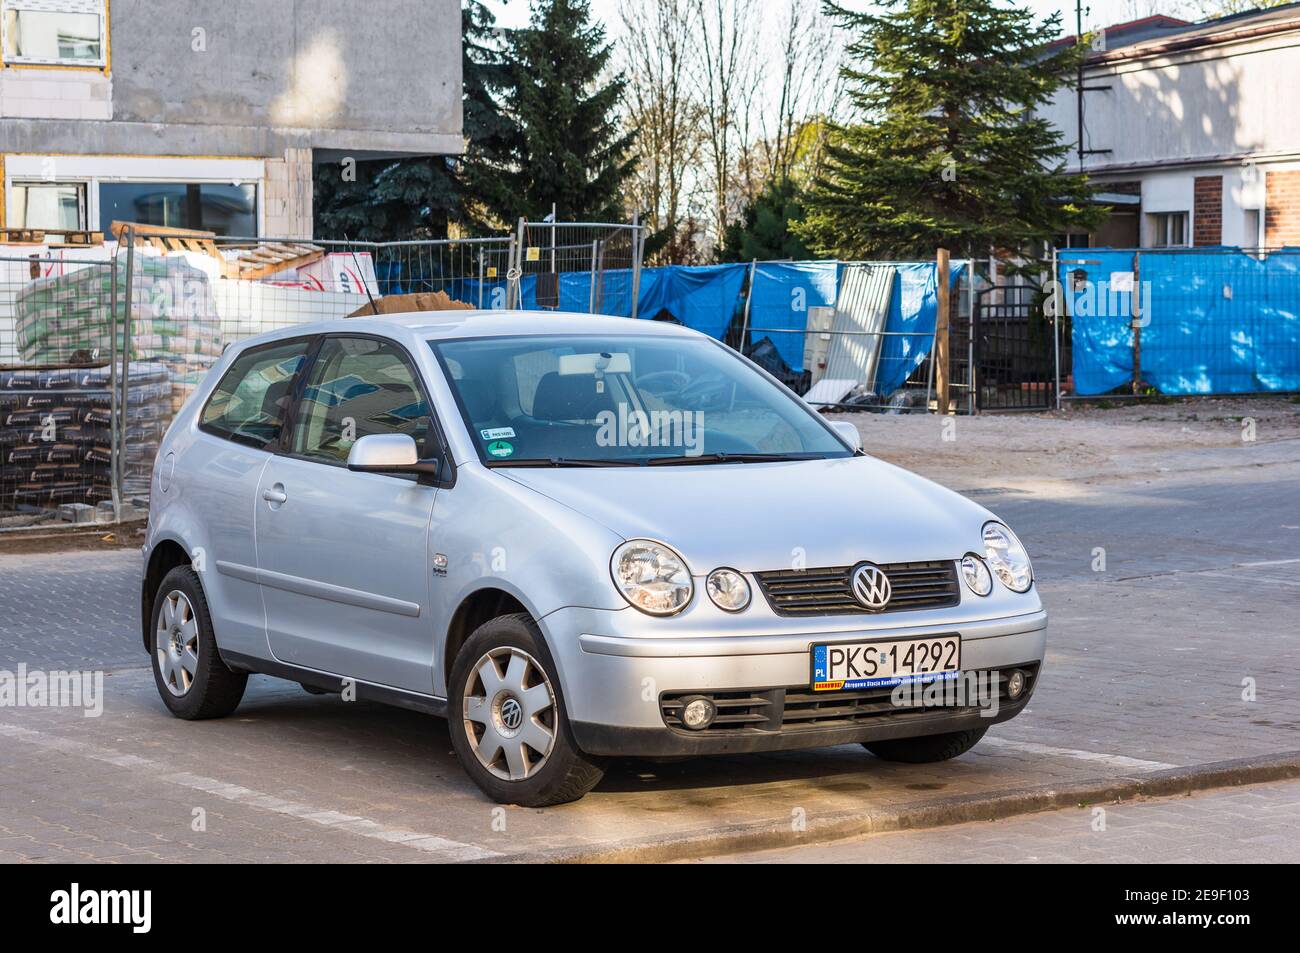 POZNAN, POLAND - Apr 17, 2019: Parked small grey Volkswagen Lupo car on a parking lot. Stock Photo